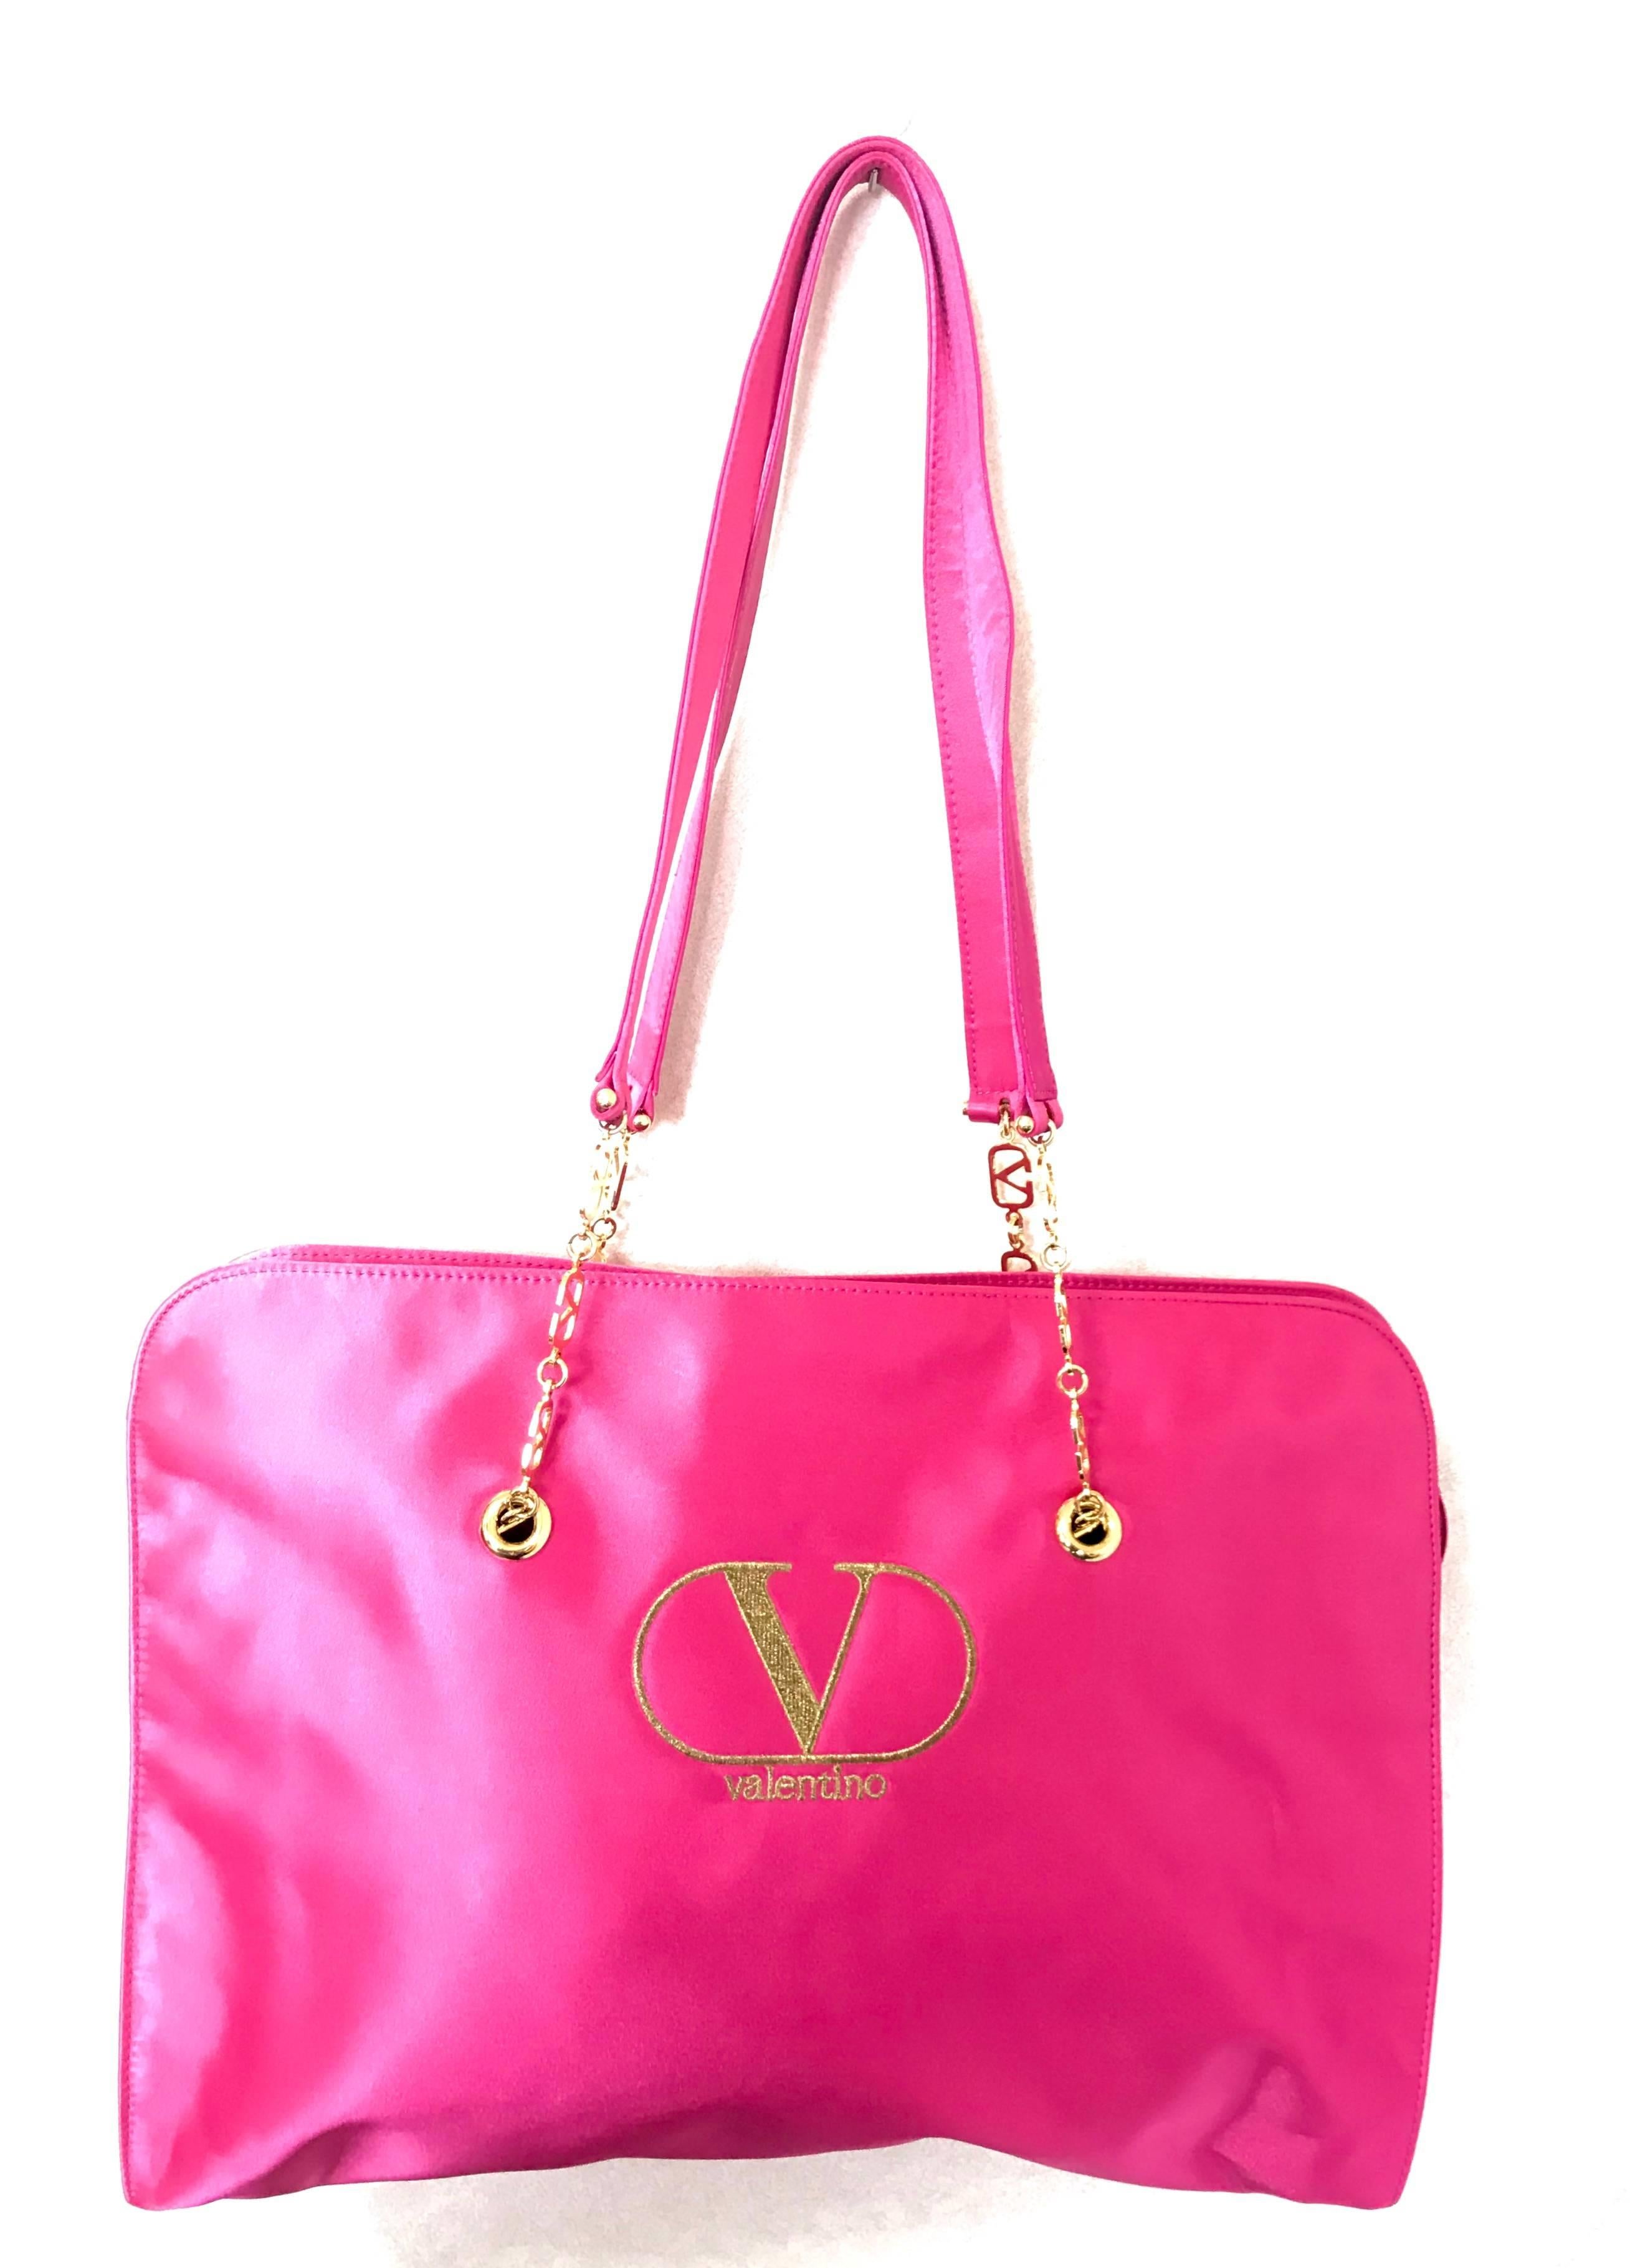 1990s. Vintage Valentino Garavani pink satin large tote bag with gold tone V logo chain straps. Good for daily bag.

This is a vintage tote bag from the VALENTINO GARAVANI ACCESSORIES collection back in the 90's.
Beautiful bright pink